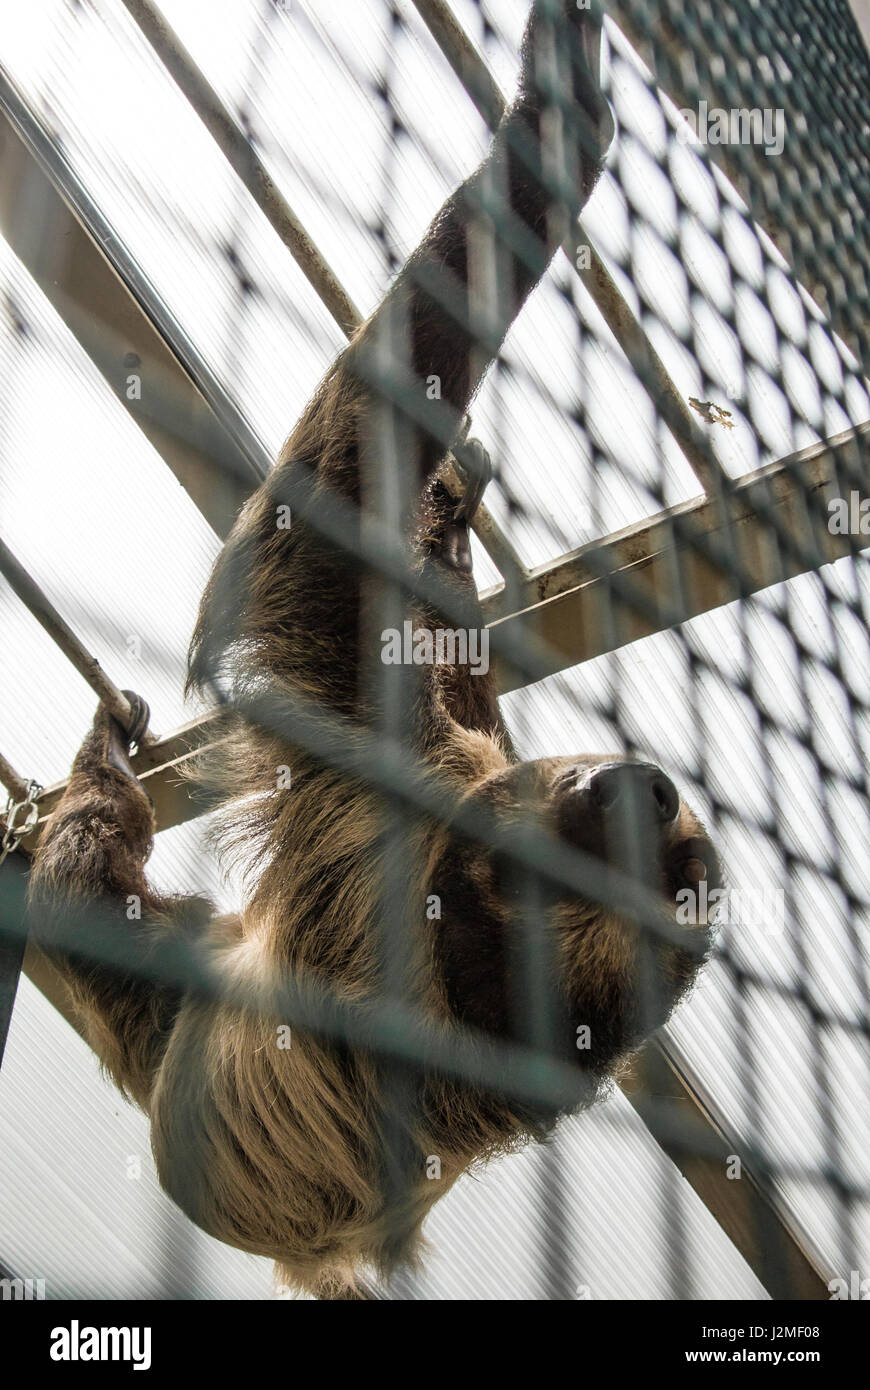 A Linnaeus's two-toed sloth (Choloepus didactylus) behind the lattice hanging at the constructions of an exhibit of America Tropicana at Budapest Zoo  Stock Photo